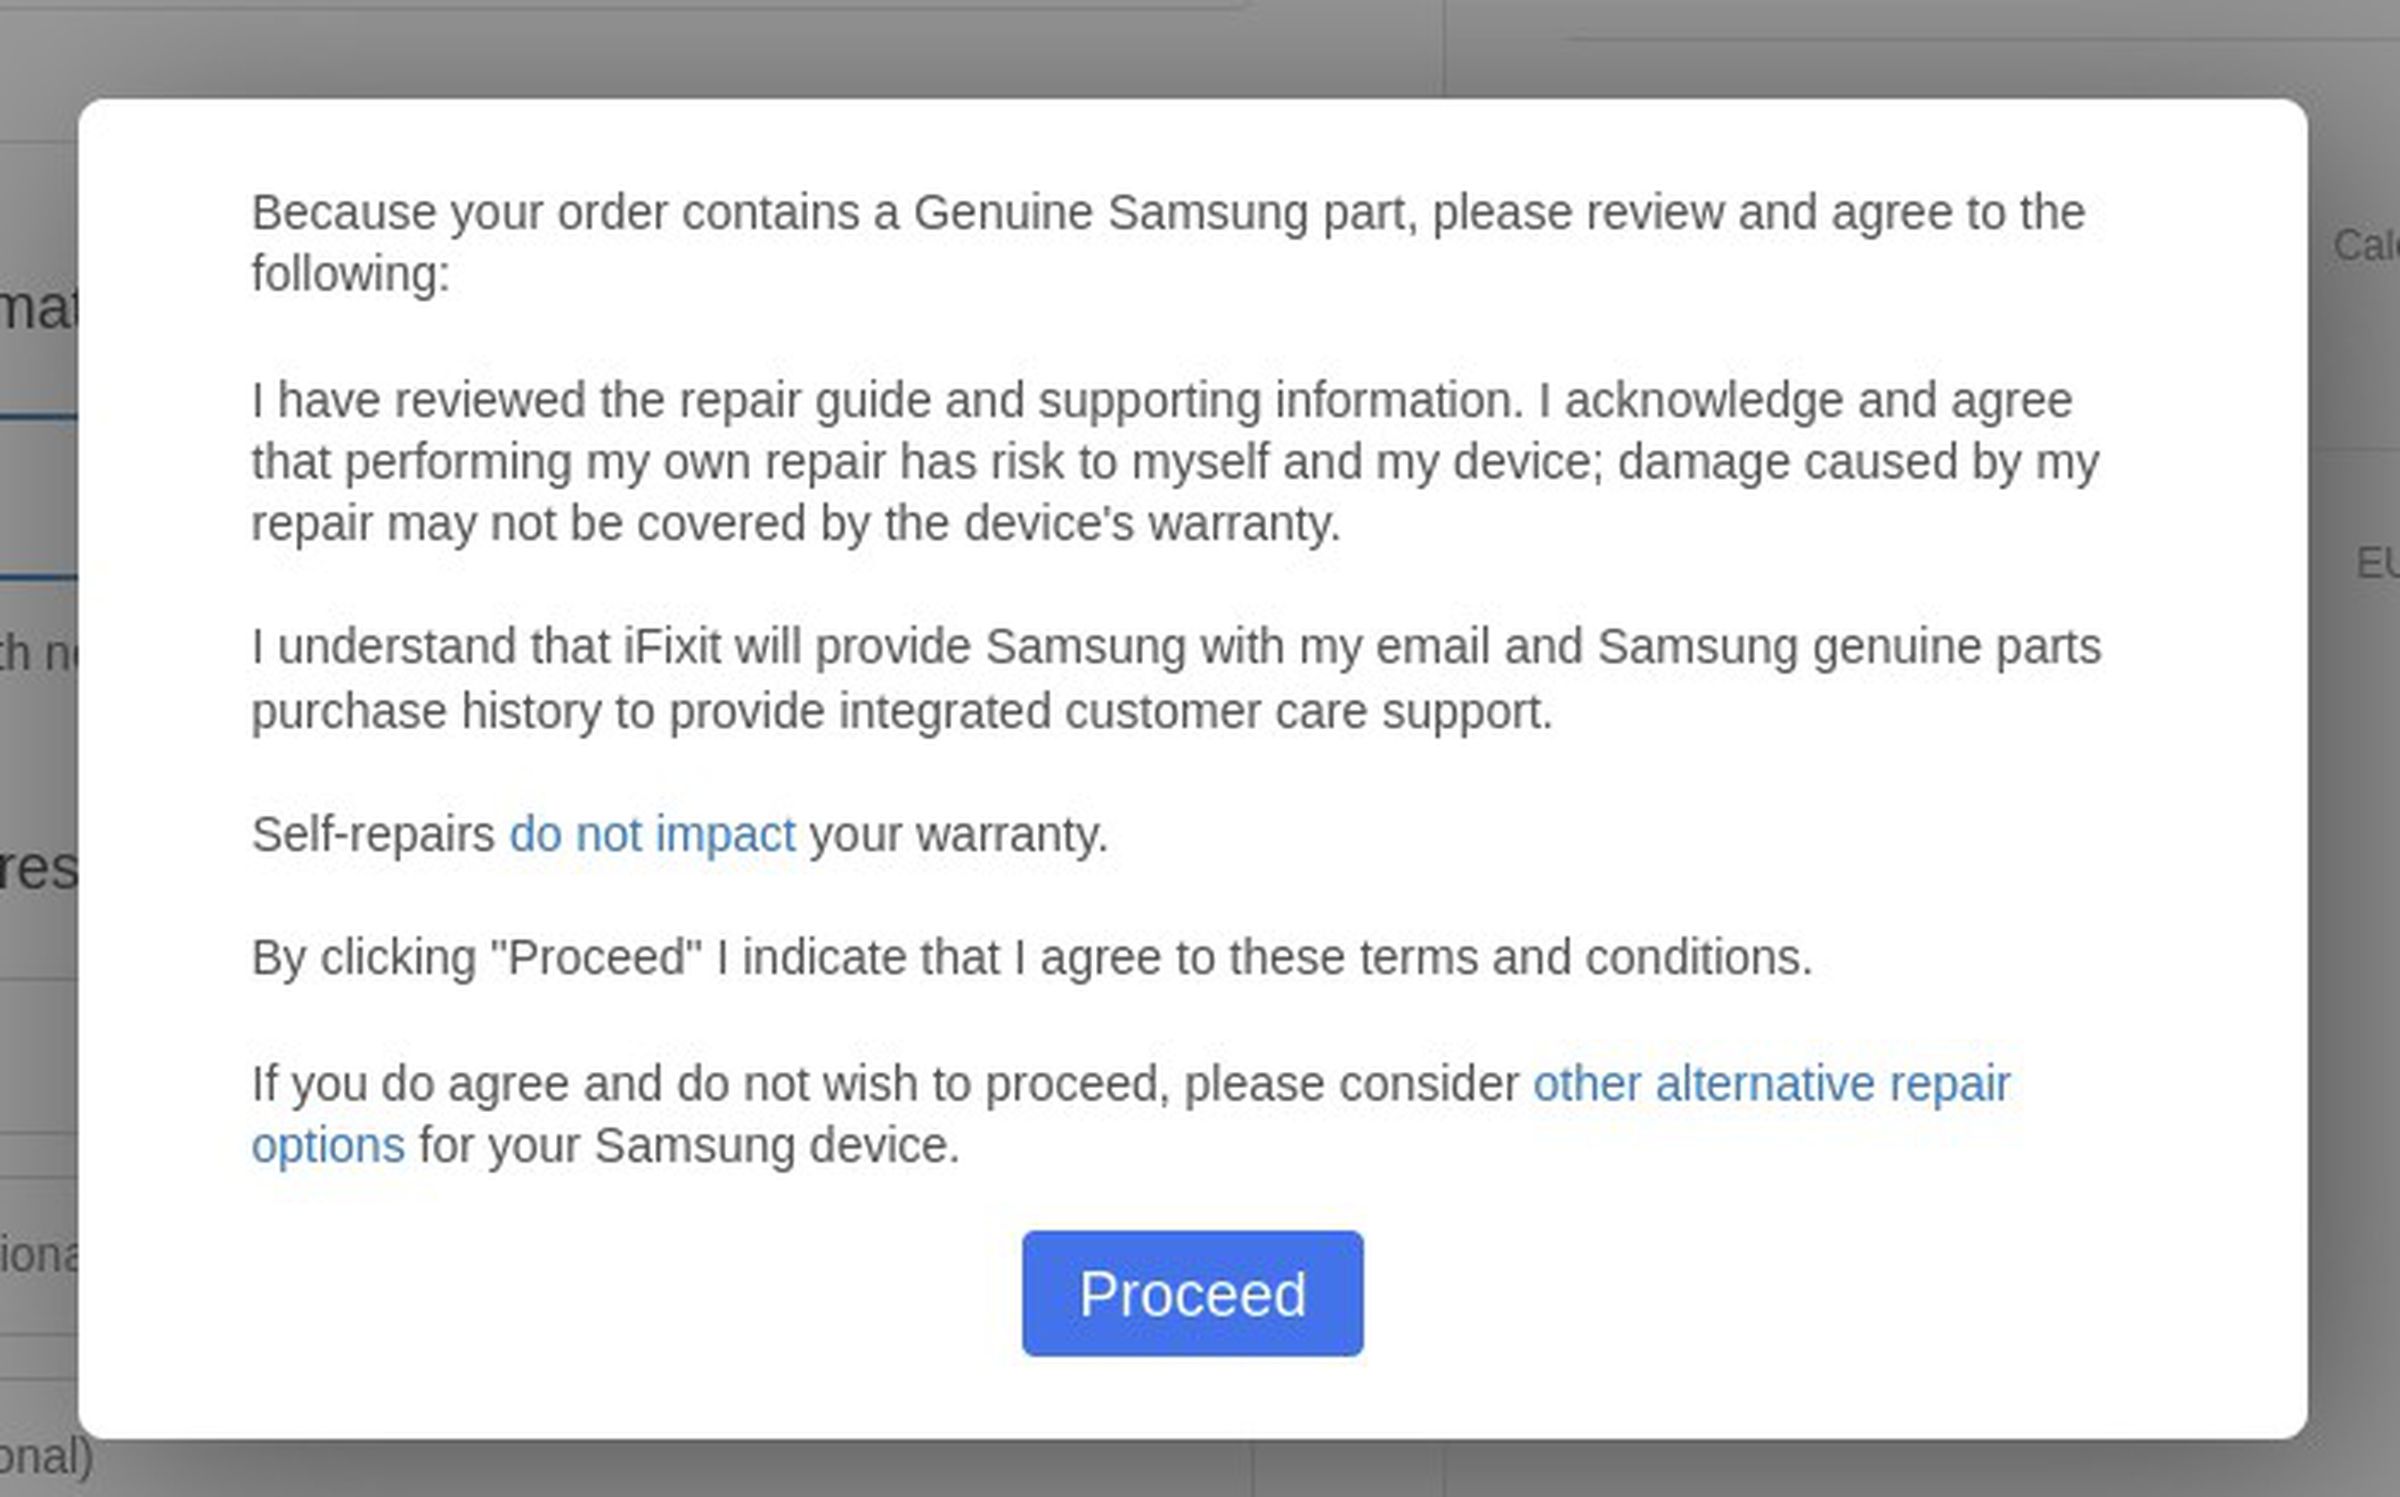 “I understand that iFixit will provide Samsung with my email and Samsung genuine parts purchase history to provide integrated customer care support.”